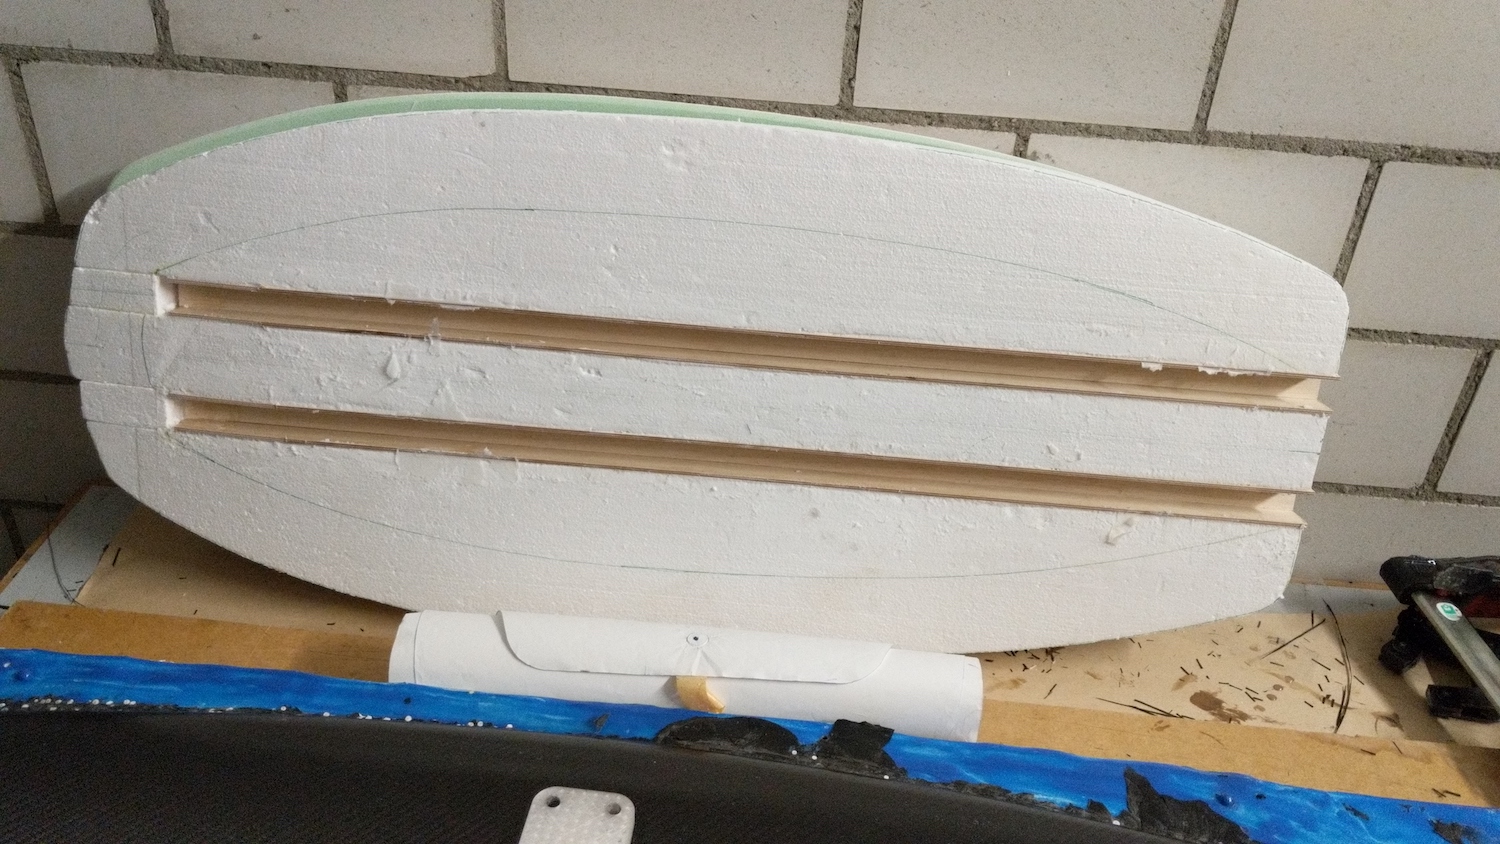 Stringers glued into the board